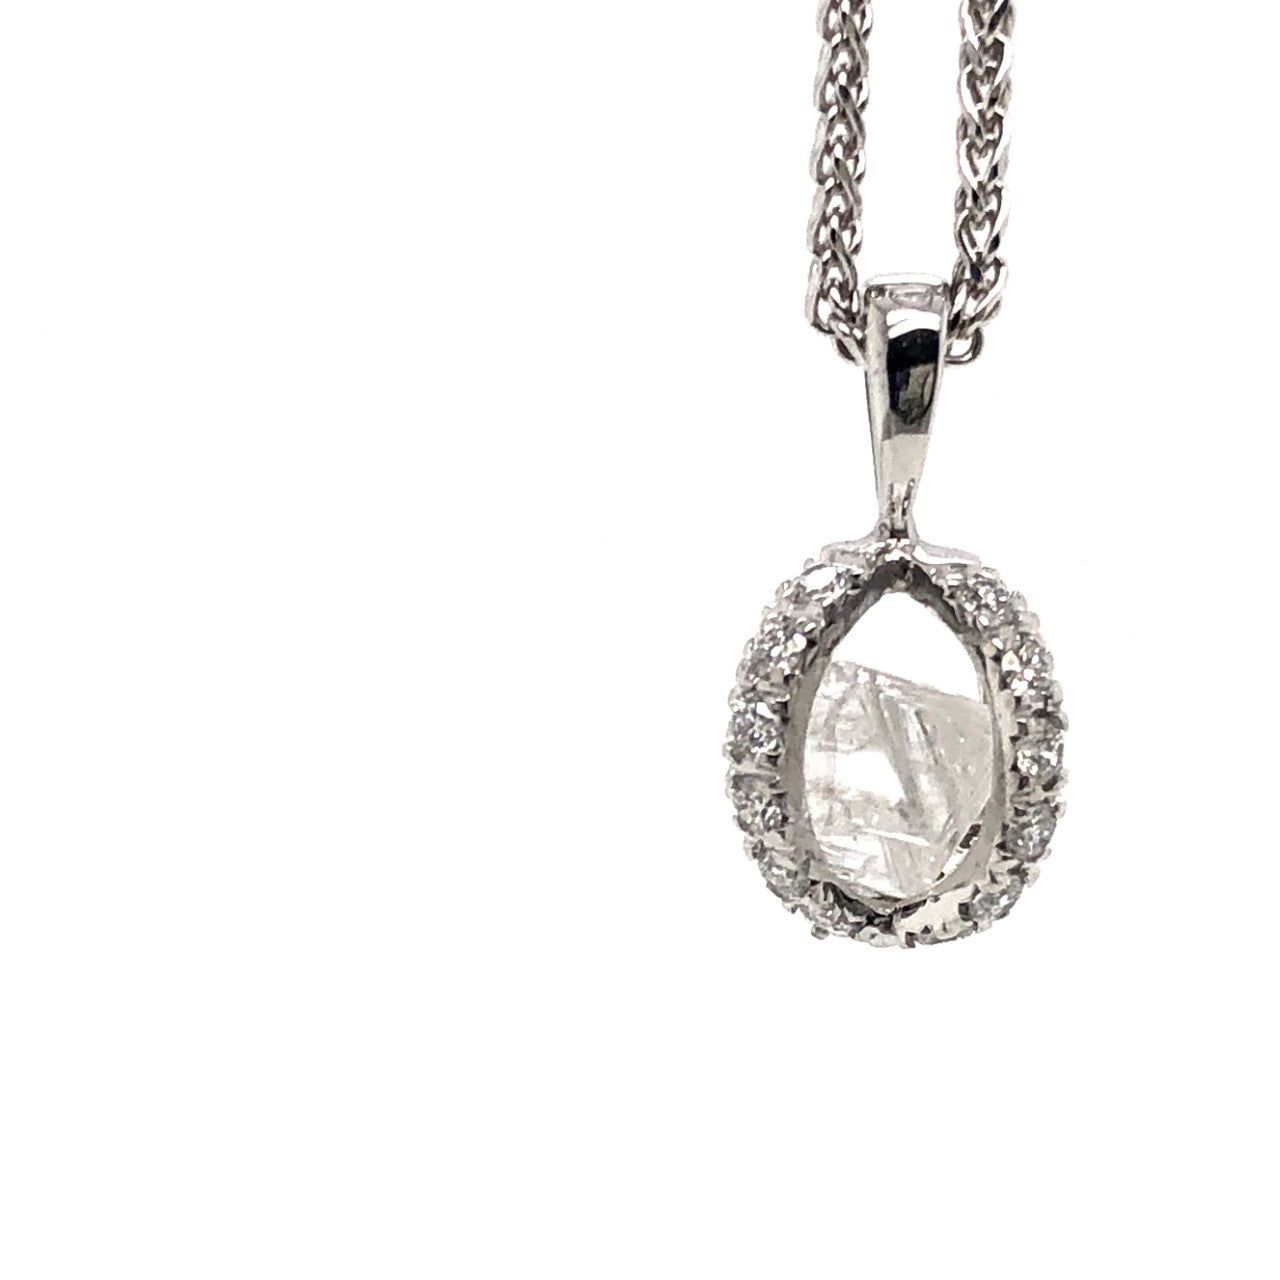 18KW Canadian Diamond Pendant With A 1.13ct Rough Diamond (Chain Included)